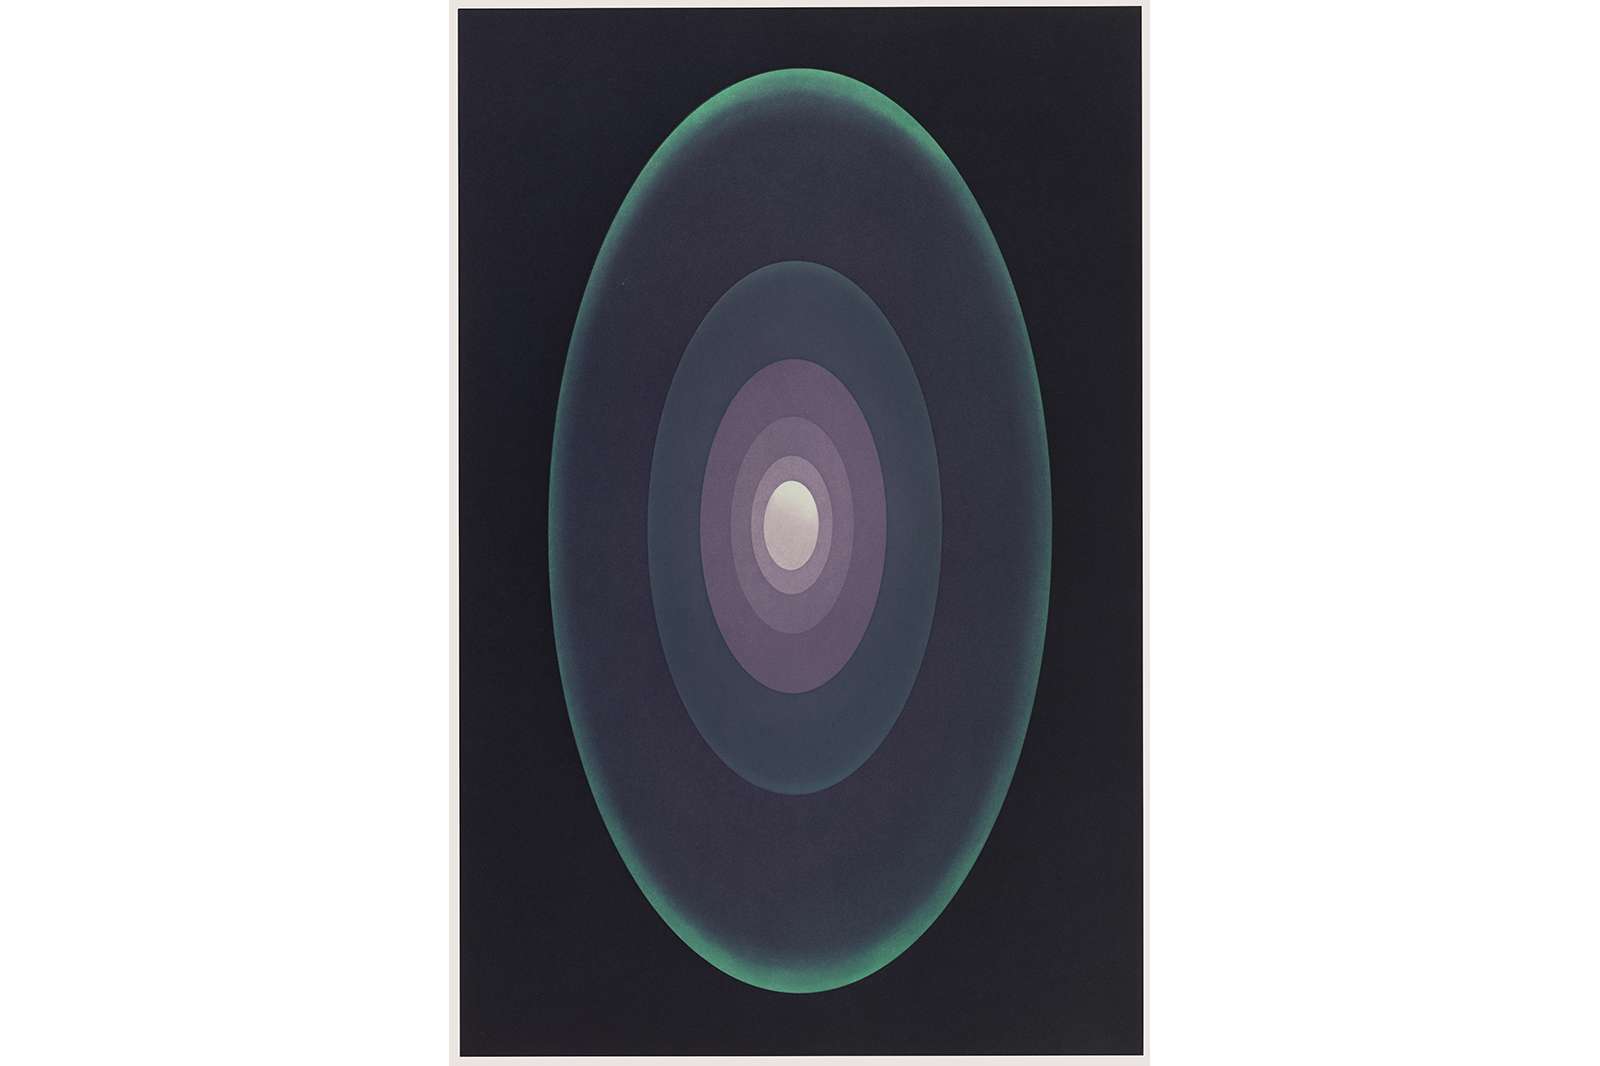 James Turrell, Meeting, 1989-90. Aquatint, 42 7/16 x 29 13/16 inches. Edition of 30.